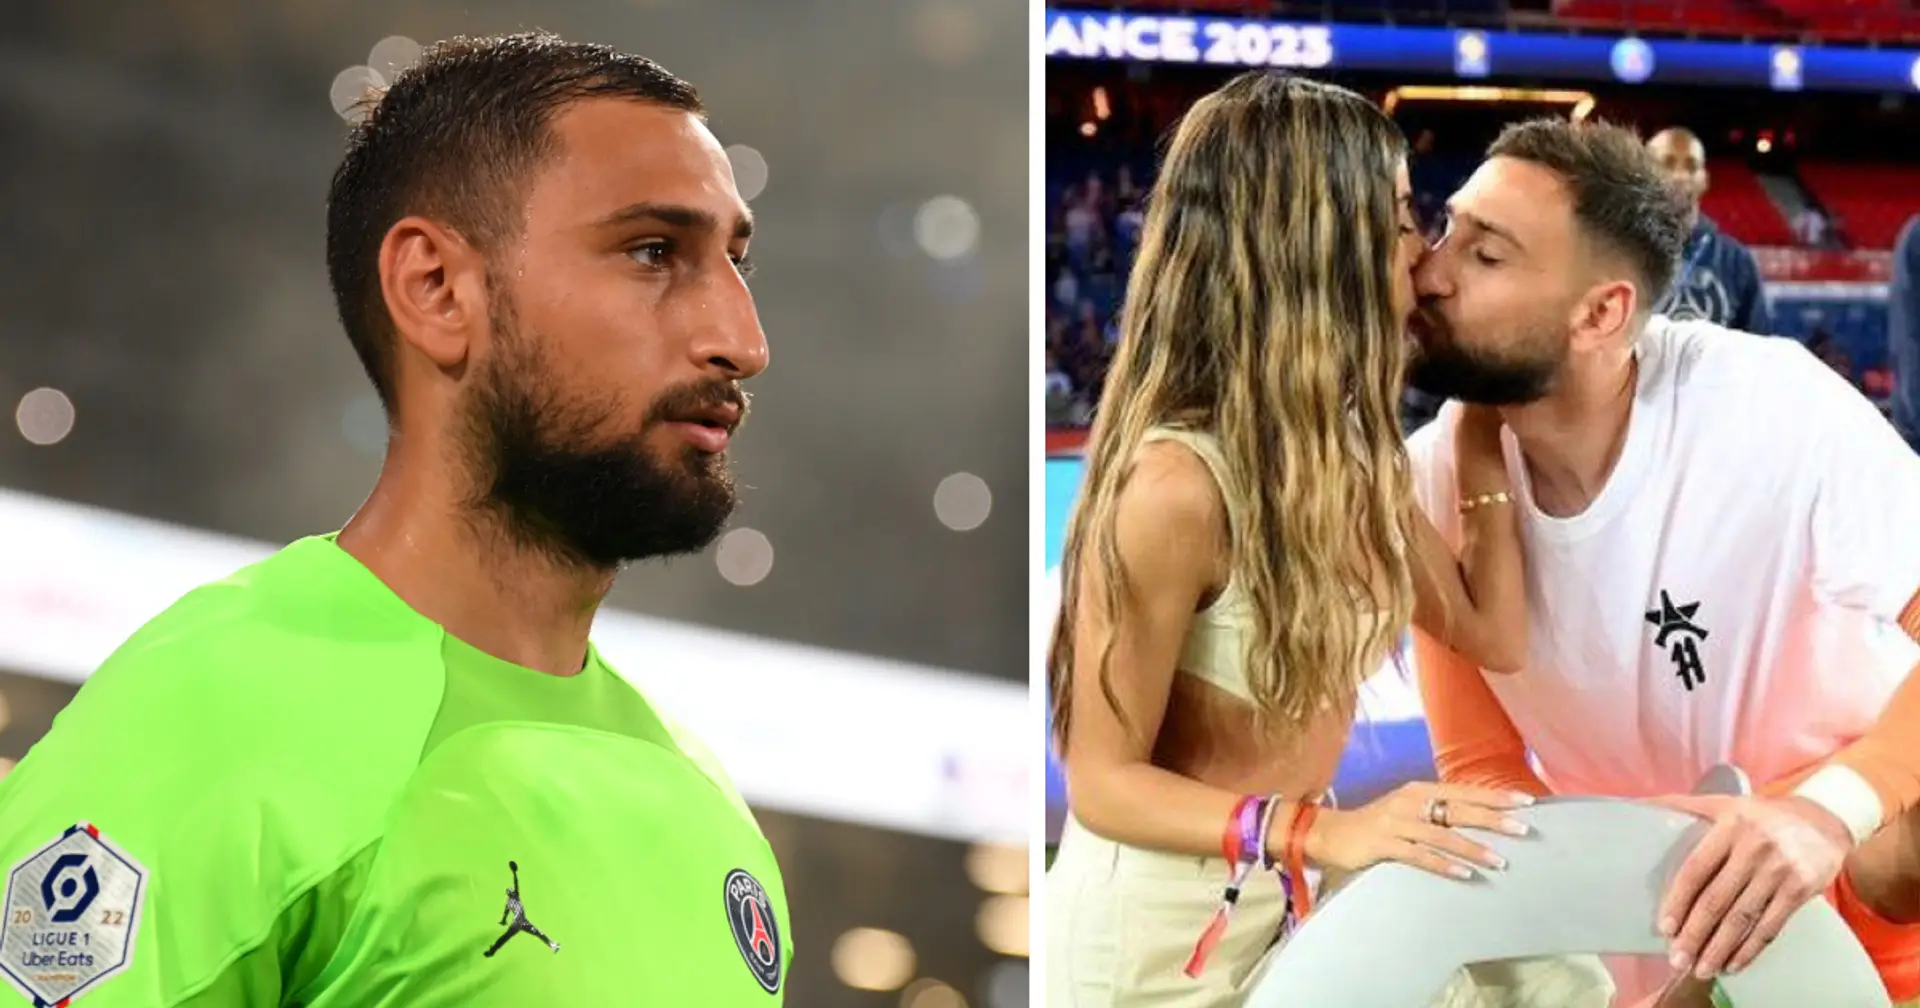 Gianluigi Donnarumma and his partner were attacked and robbed at Paris home